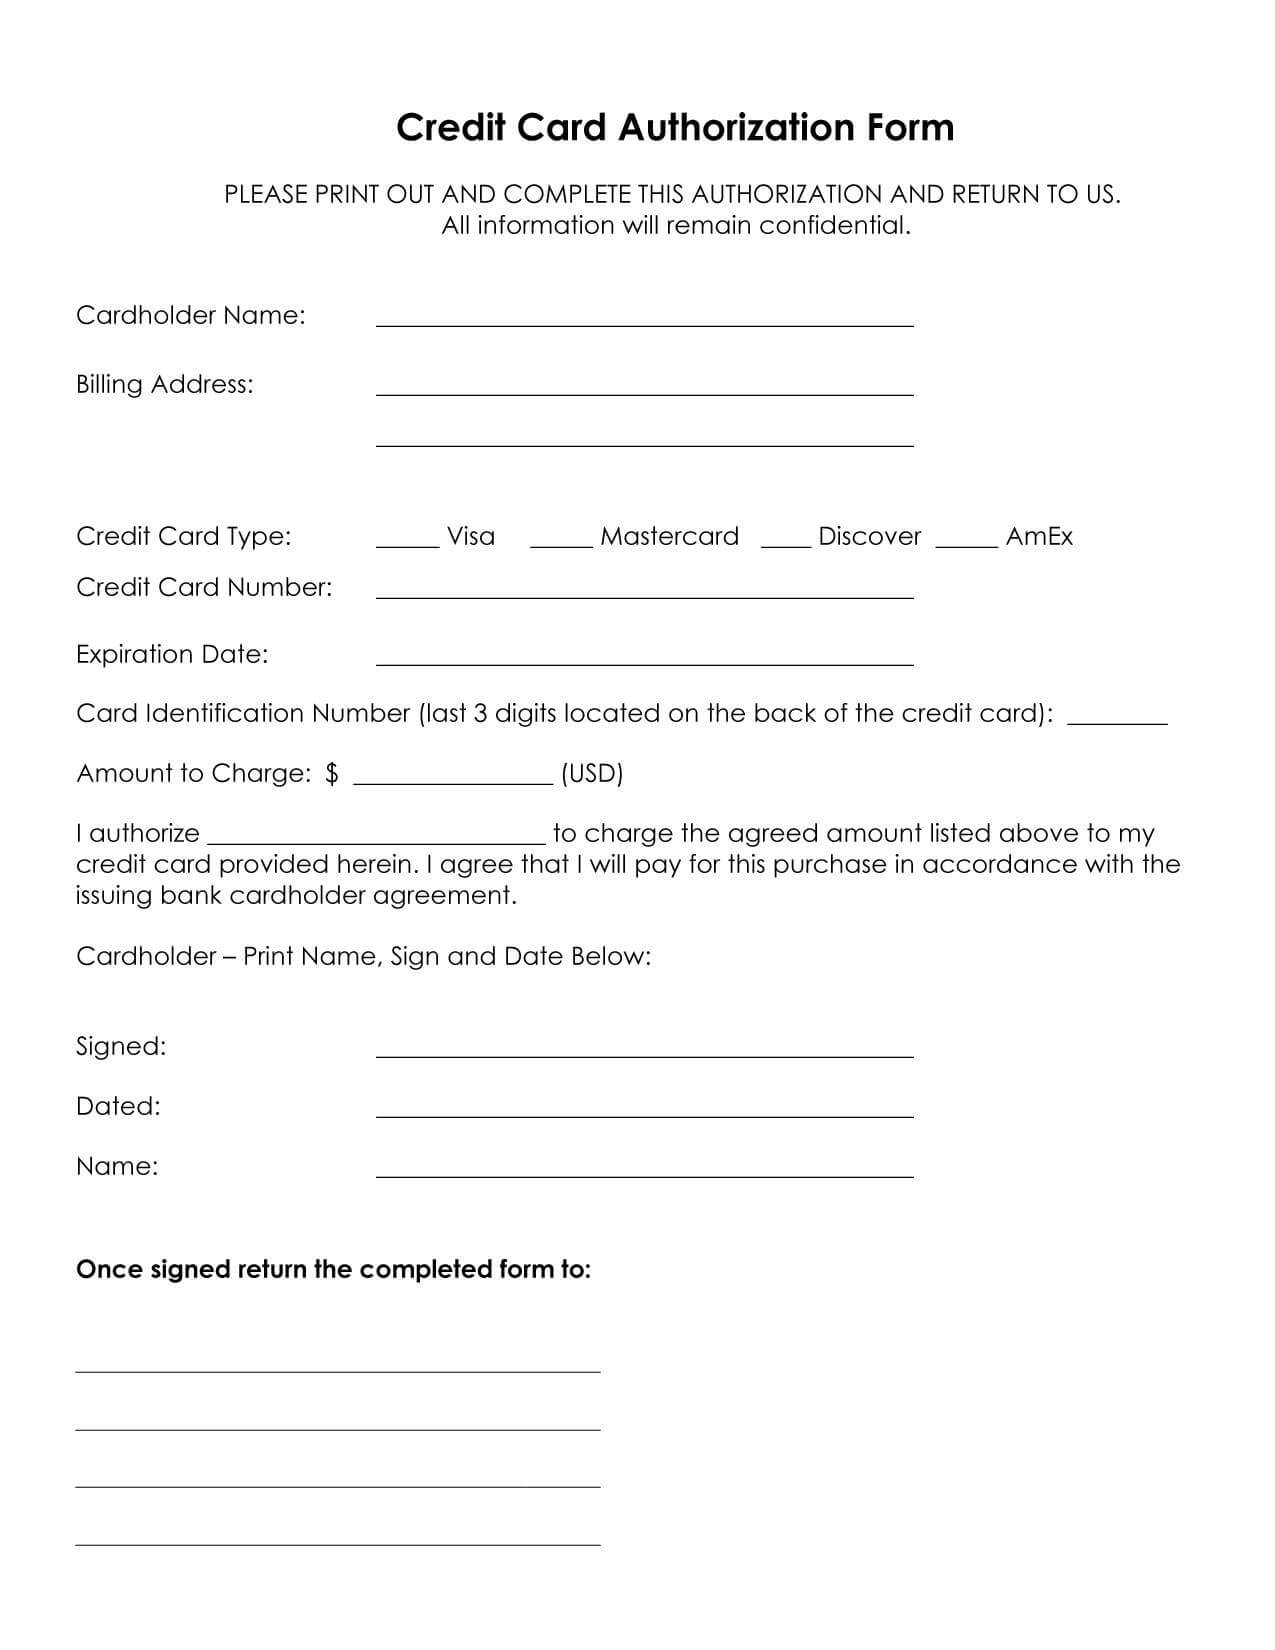 Credit Card Authorization Form Template Microsoft - Calep Intended For Credit Card Authorization Form Template Word